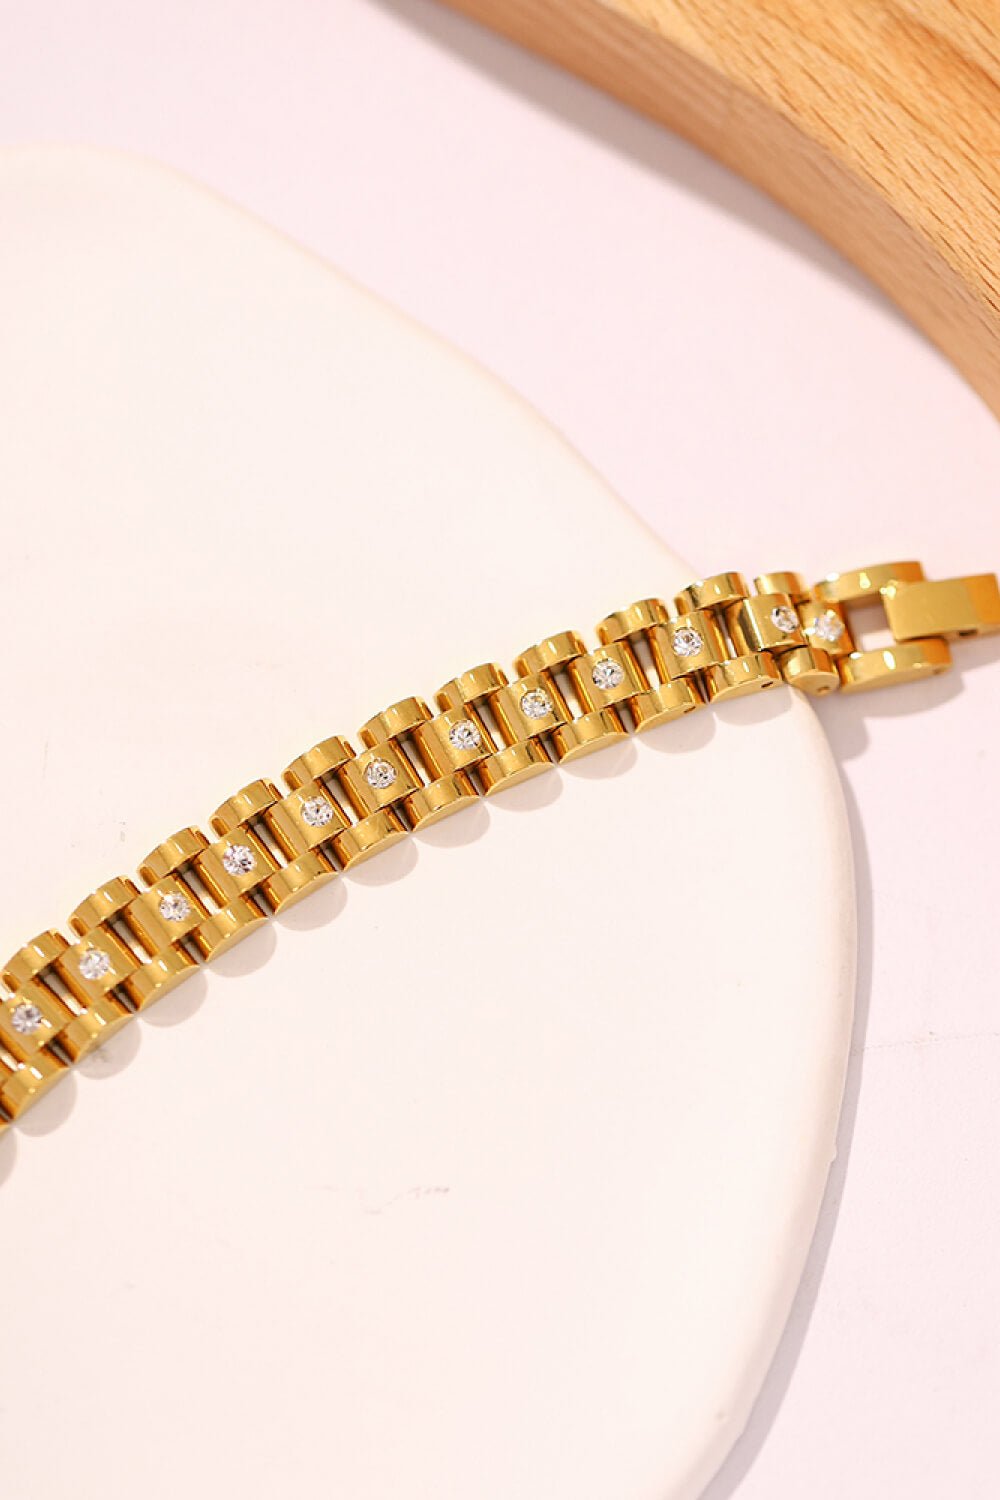 18K Gold-Plated Watch Band Bracelet - Uylee's Boutique